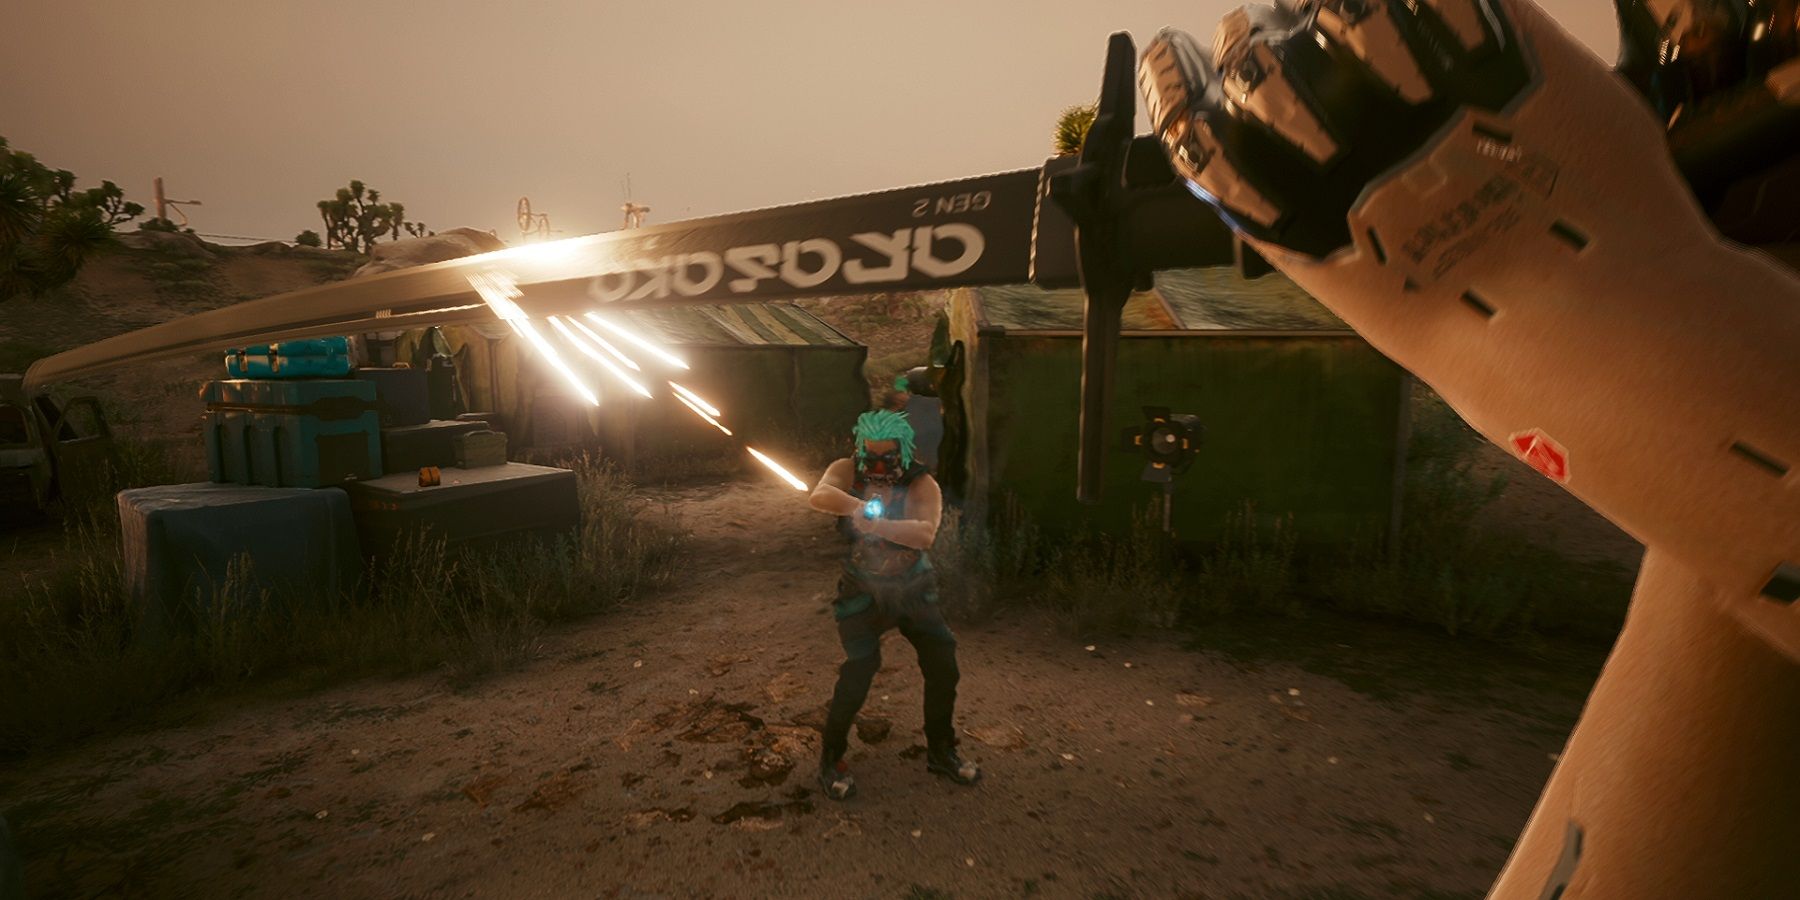 Image from Cyberpunk 2077 showing the player deflecting a bullet with a katana.